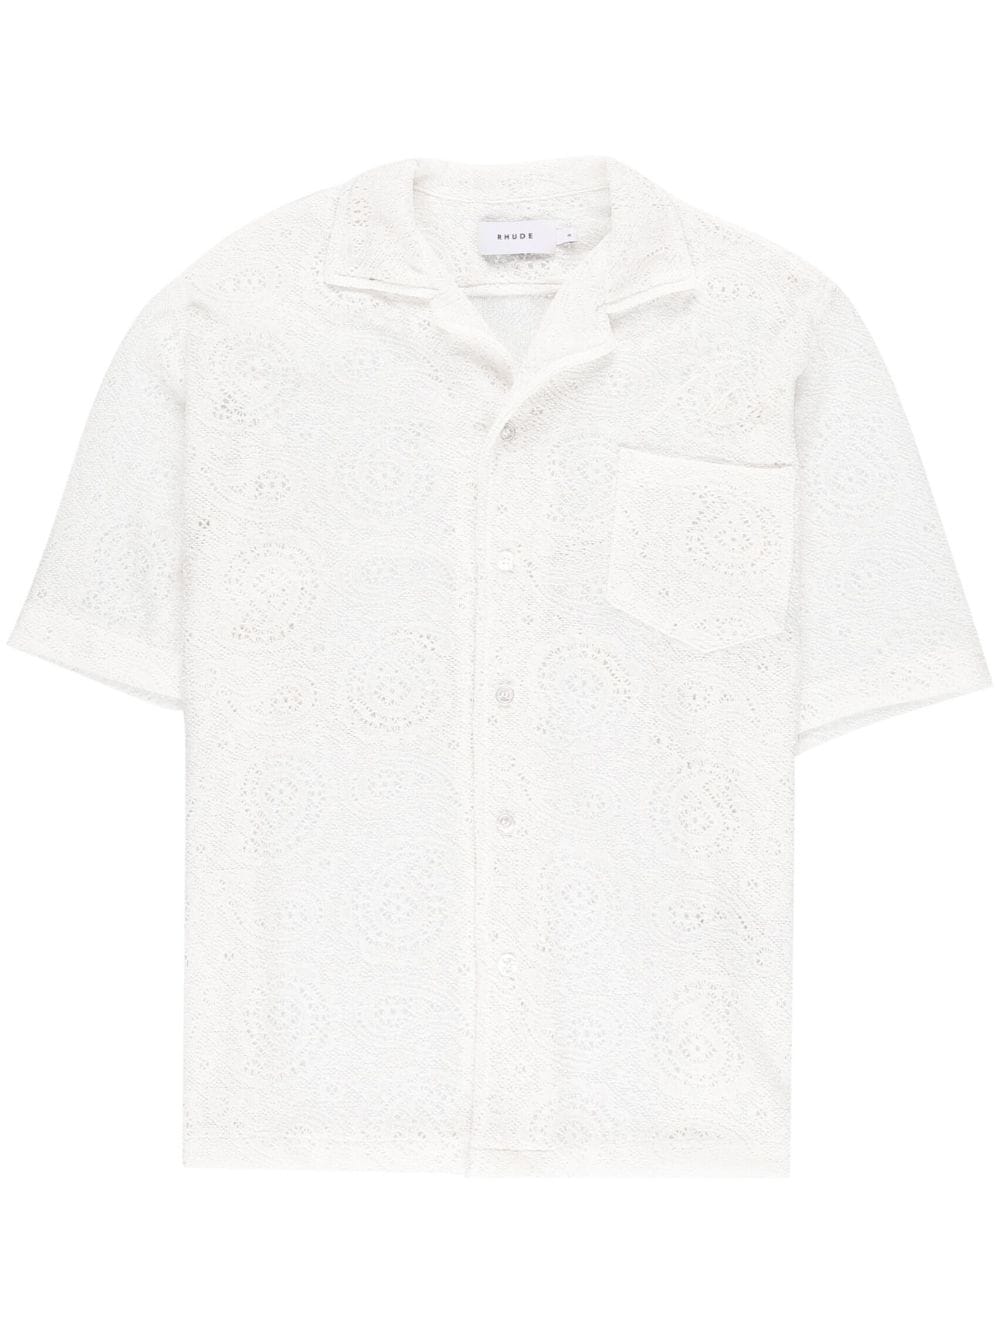 RHUDE FLORAL-LACE EMBROIDERED SHORT-SLEEVE SHIRT